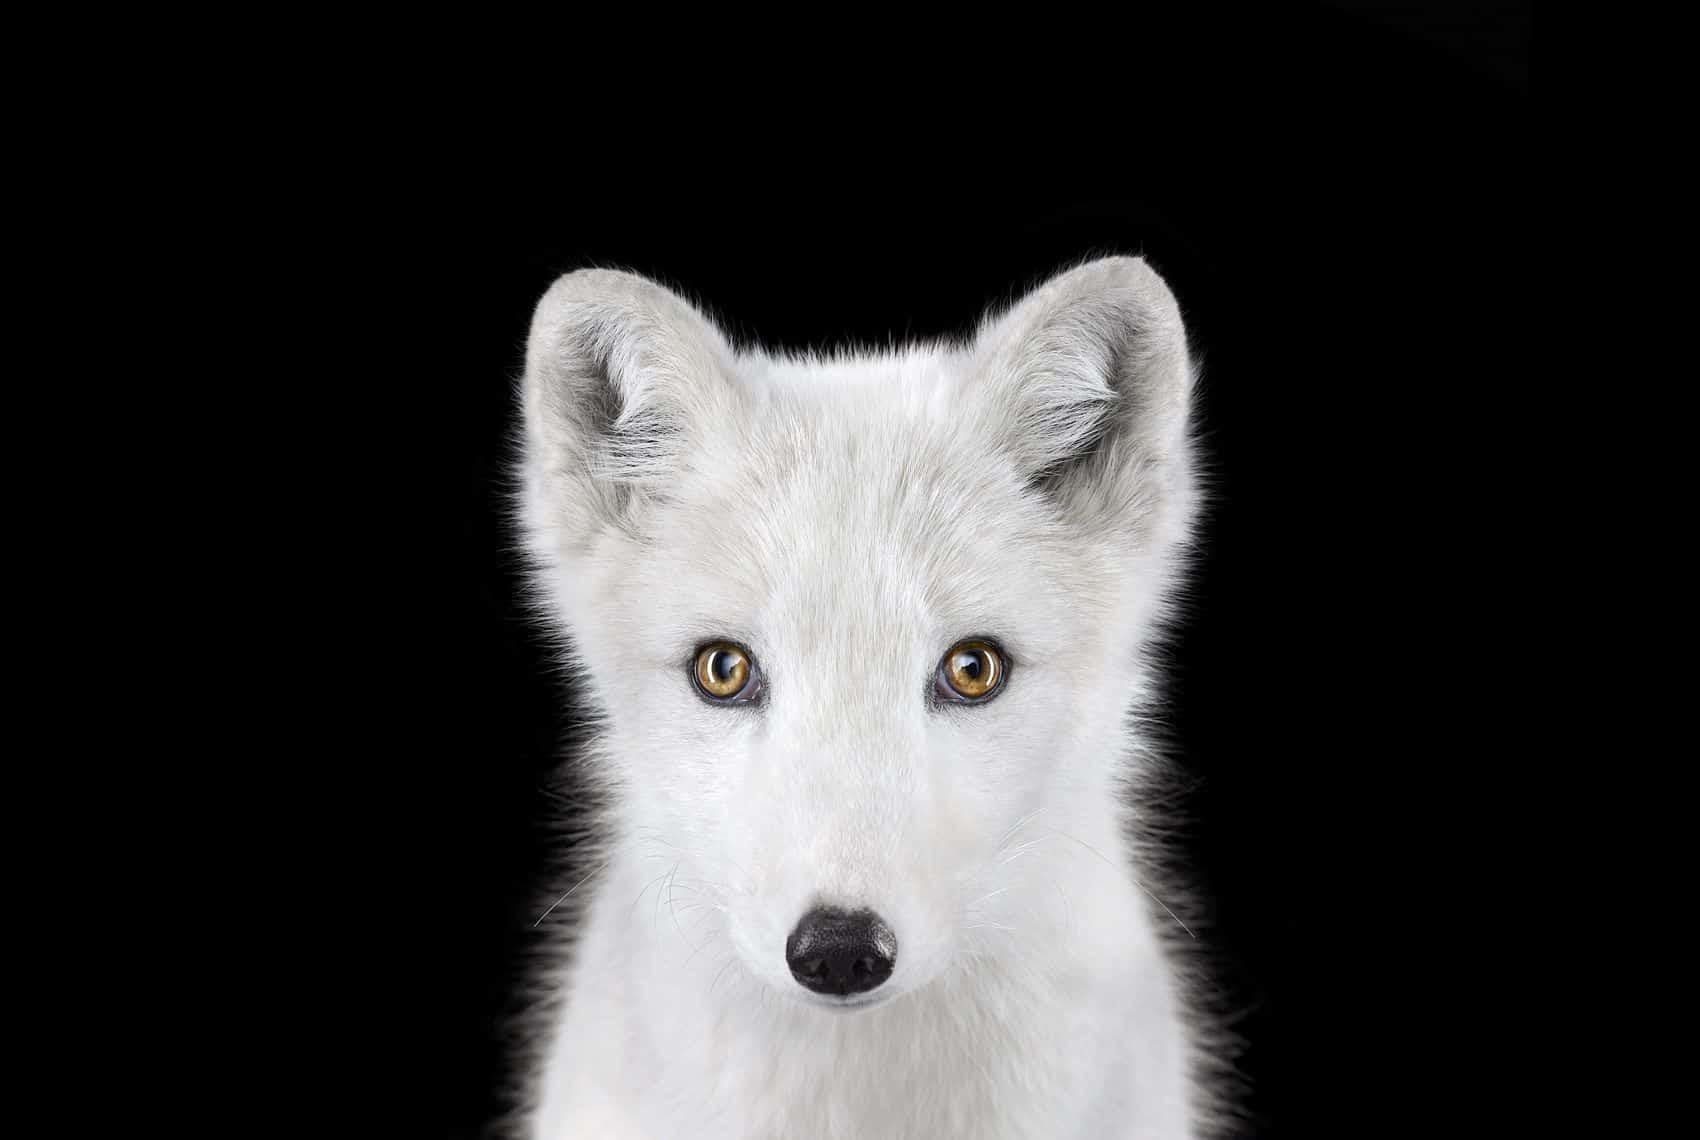 'Arctic Fox #1, Los Angeles, CA, 2011' is a limited-edition photograph by contemporary artist Brad Wilson from the ‘Affinity’ series which features studio portraits of wild animals. 

This photograph is sold unframed as a print only. It is available